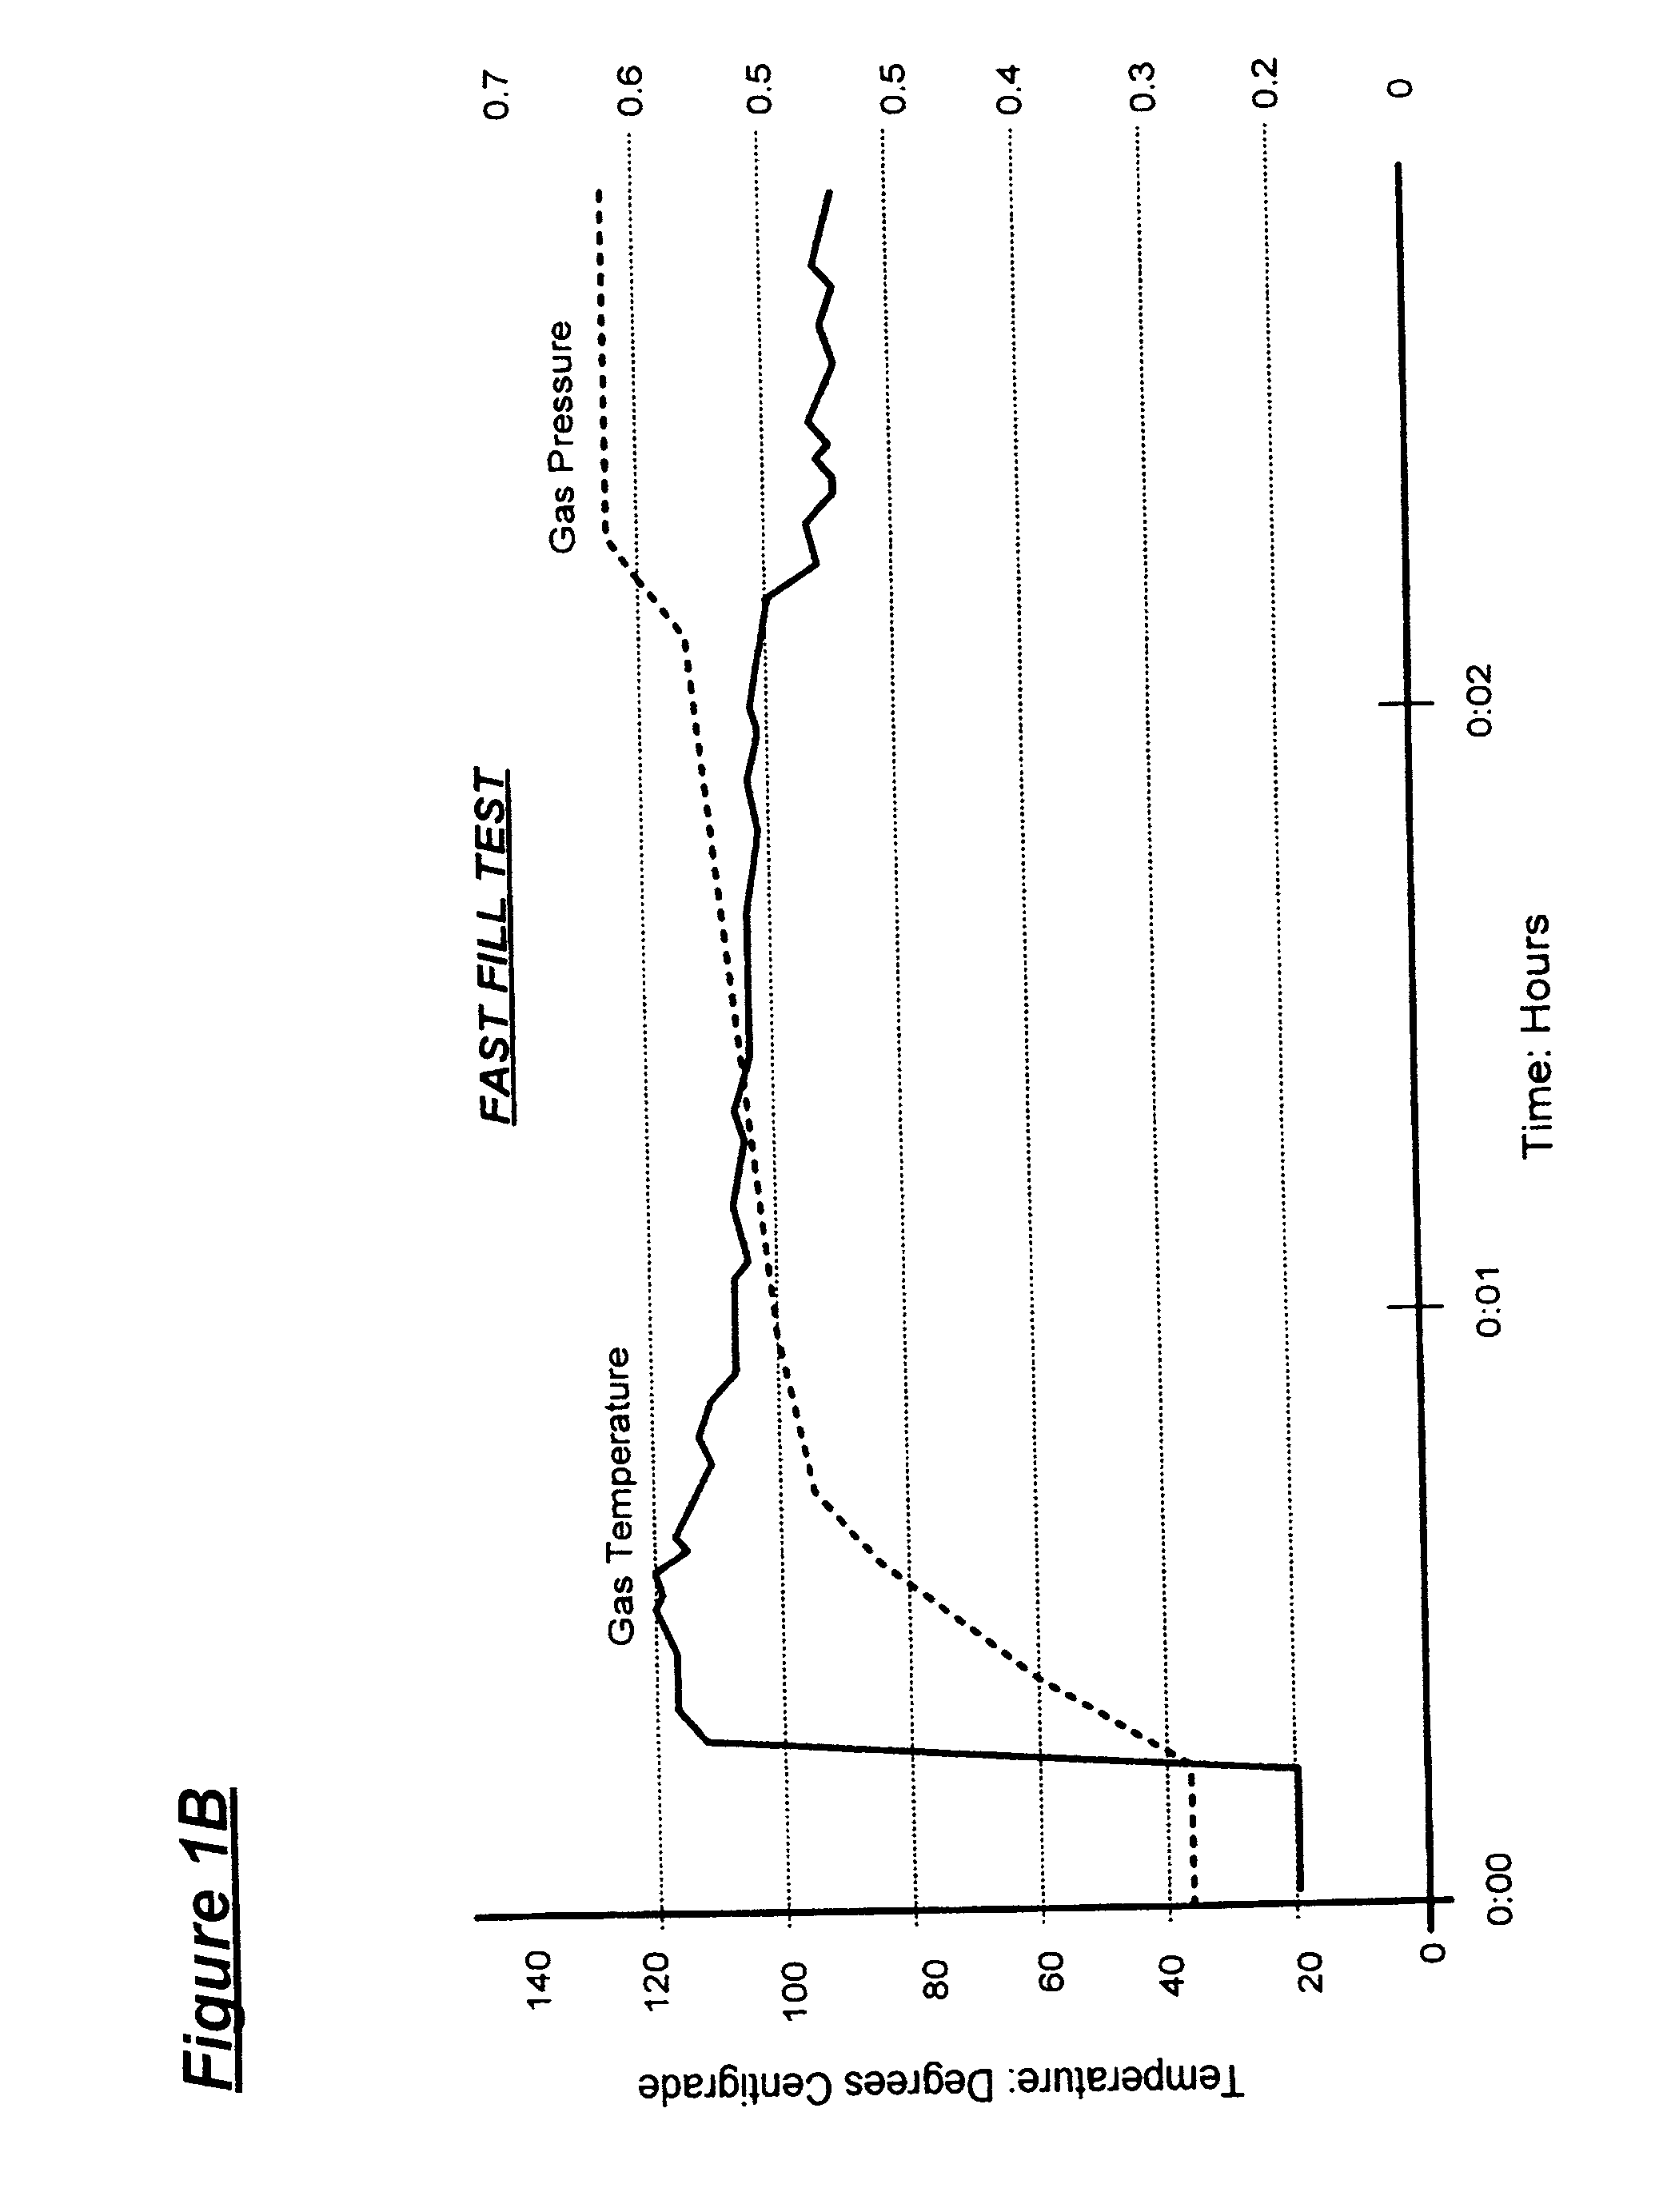 System for Enhancing the Efficiency of High Pressure Storage Tanks for Compressed Natural Gas or Hydrogen